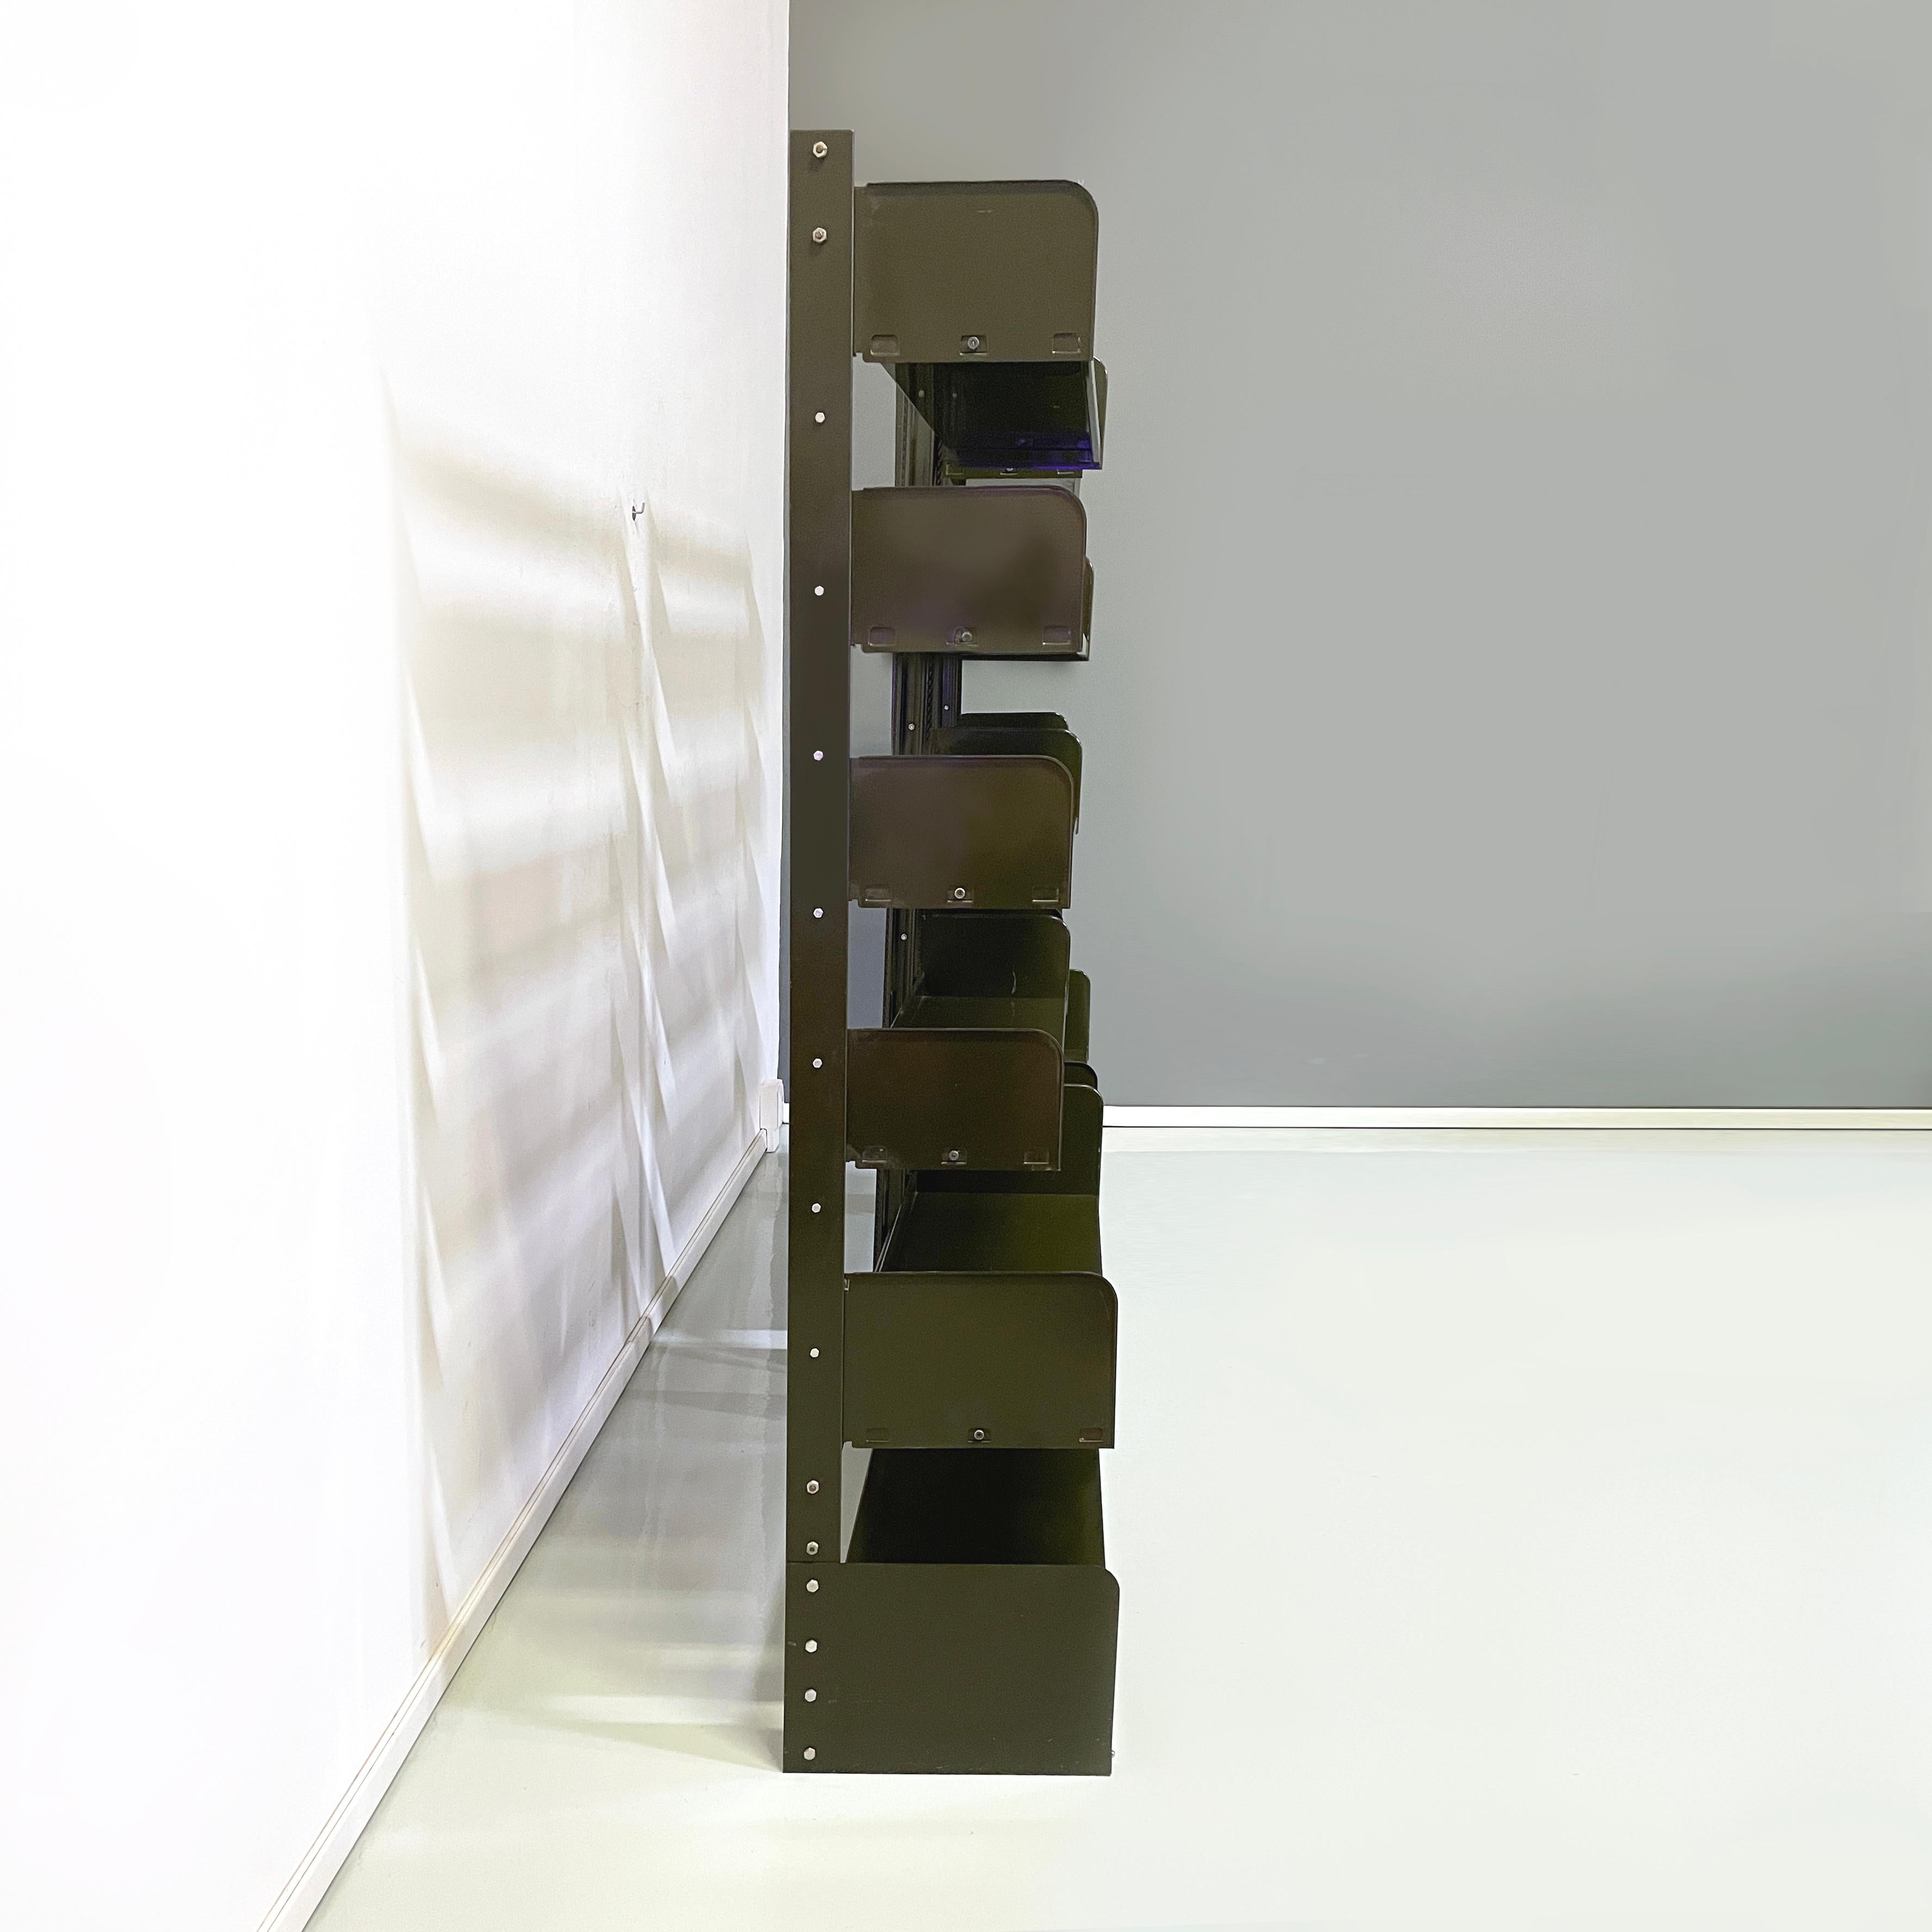 Italian mid-century modern green Modular bookcase Congresso  by Lips Vago, 1960s
Modular bookcase mod. Congresso with structure entirely in dark green metal, original of the time. The structure is made up of 2 modules, which can be used together or